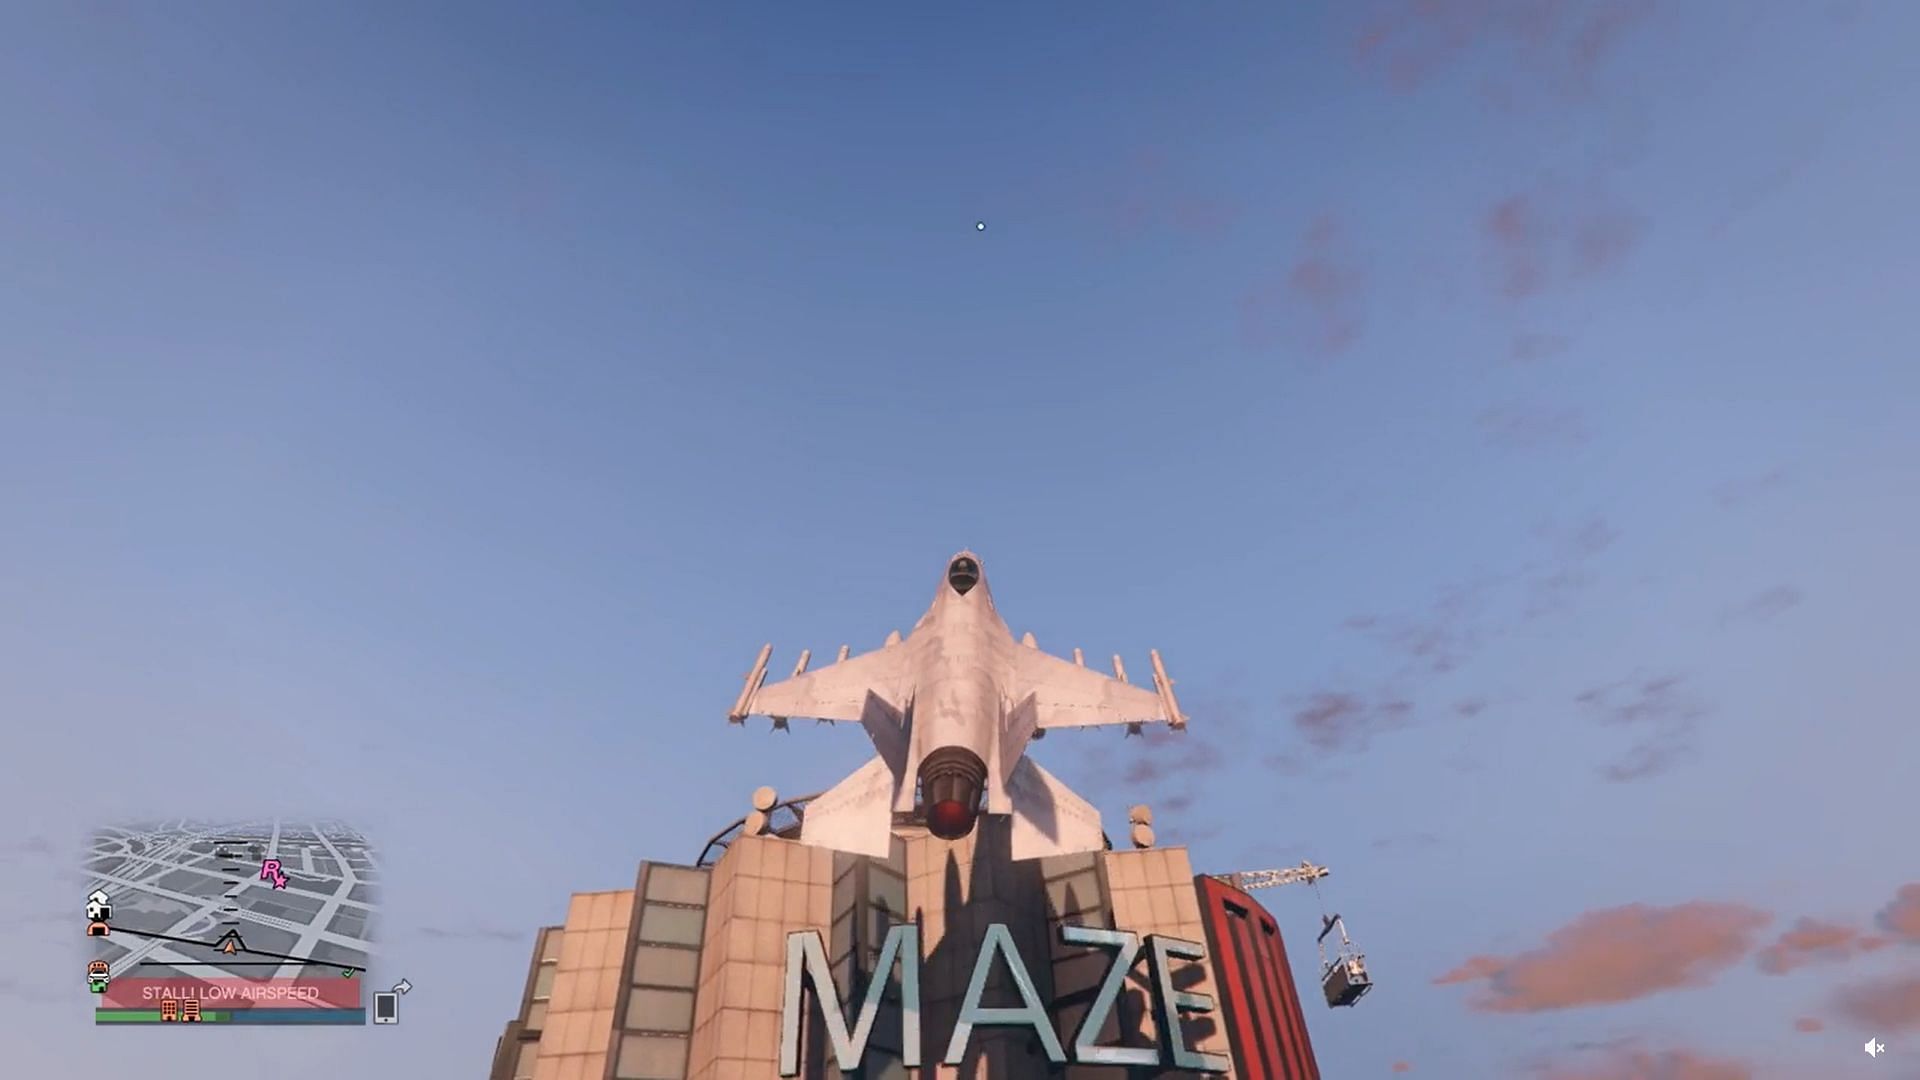 GTA Online gamer climbs to new heights in the Lazer (Image via Reddit @u/Stoned_n_hungry)